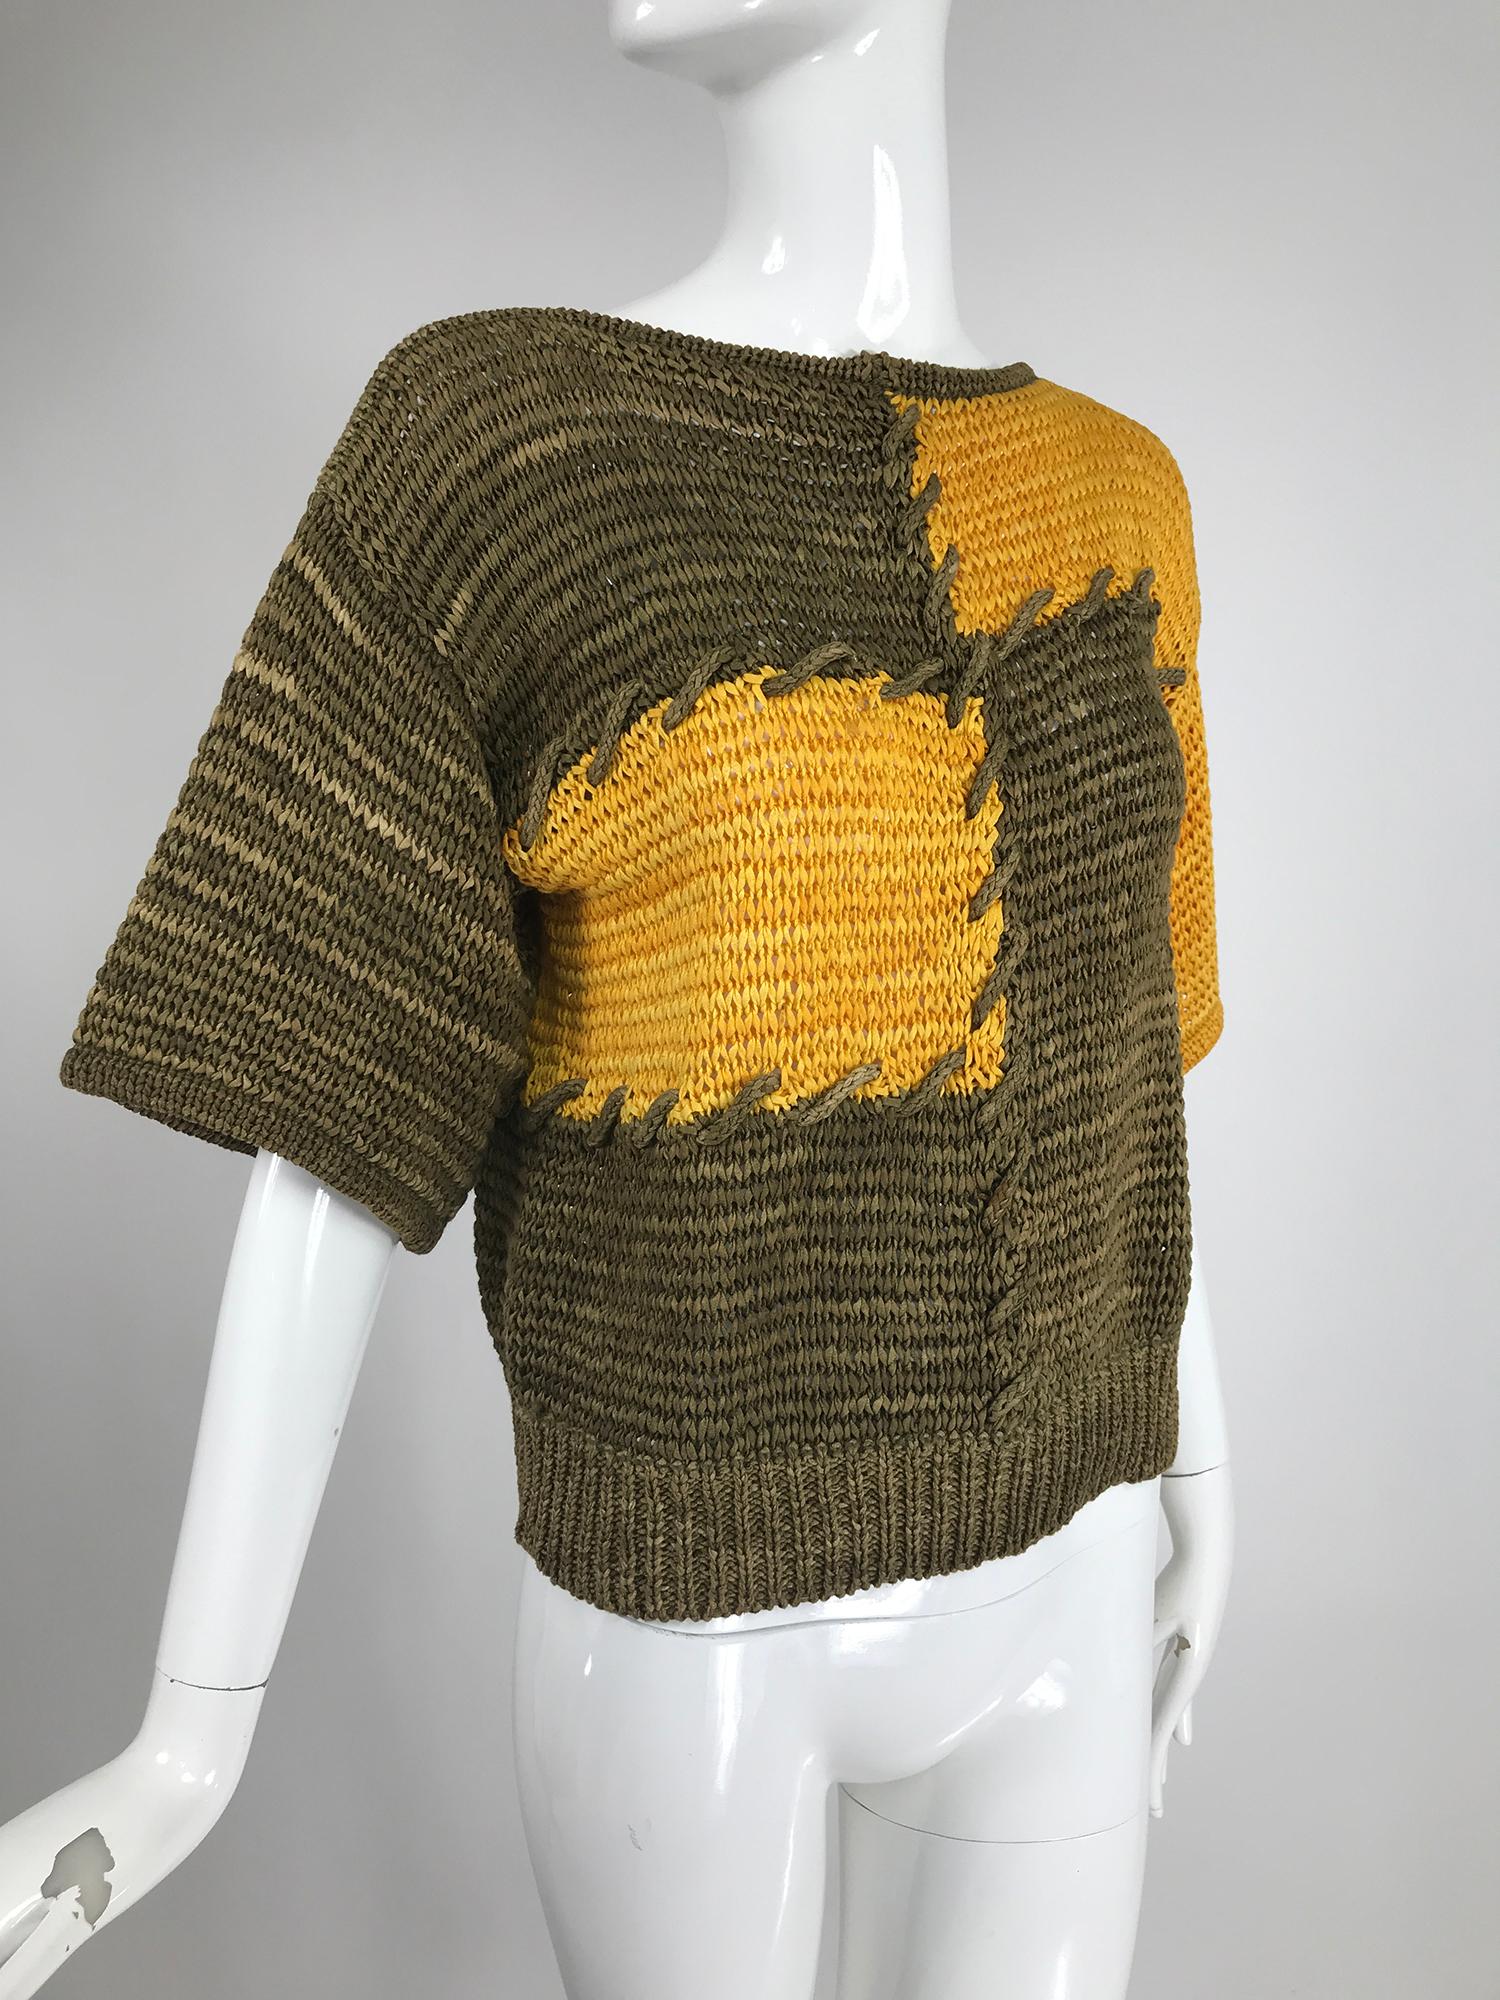 Louis Feraud ribbon knit colour block sweater in moss green and autumn yellow, the colours are purposely irregular as hand dying can be. The ribbon is narrow cotton knit, the sweater is 100% cotton. Bateau neck sweater has elbow length full sleeves.